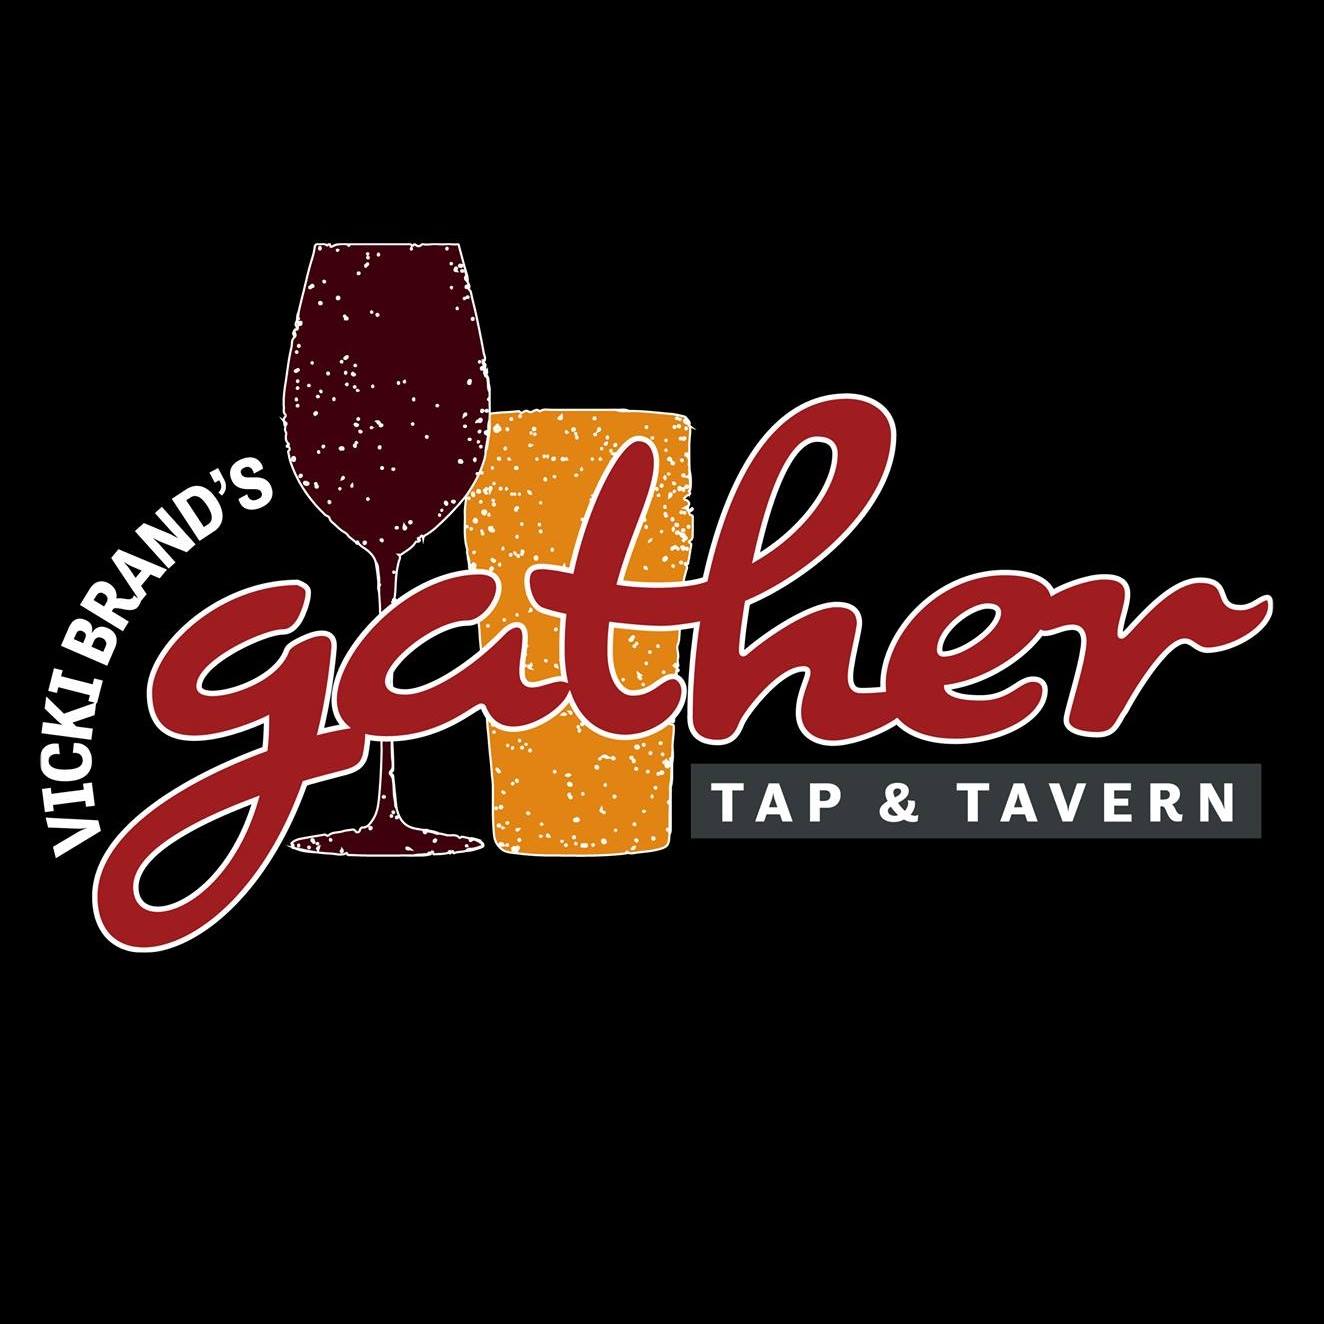 Gather Tap and Tavern